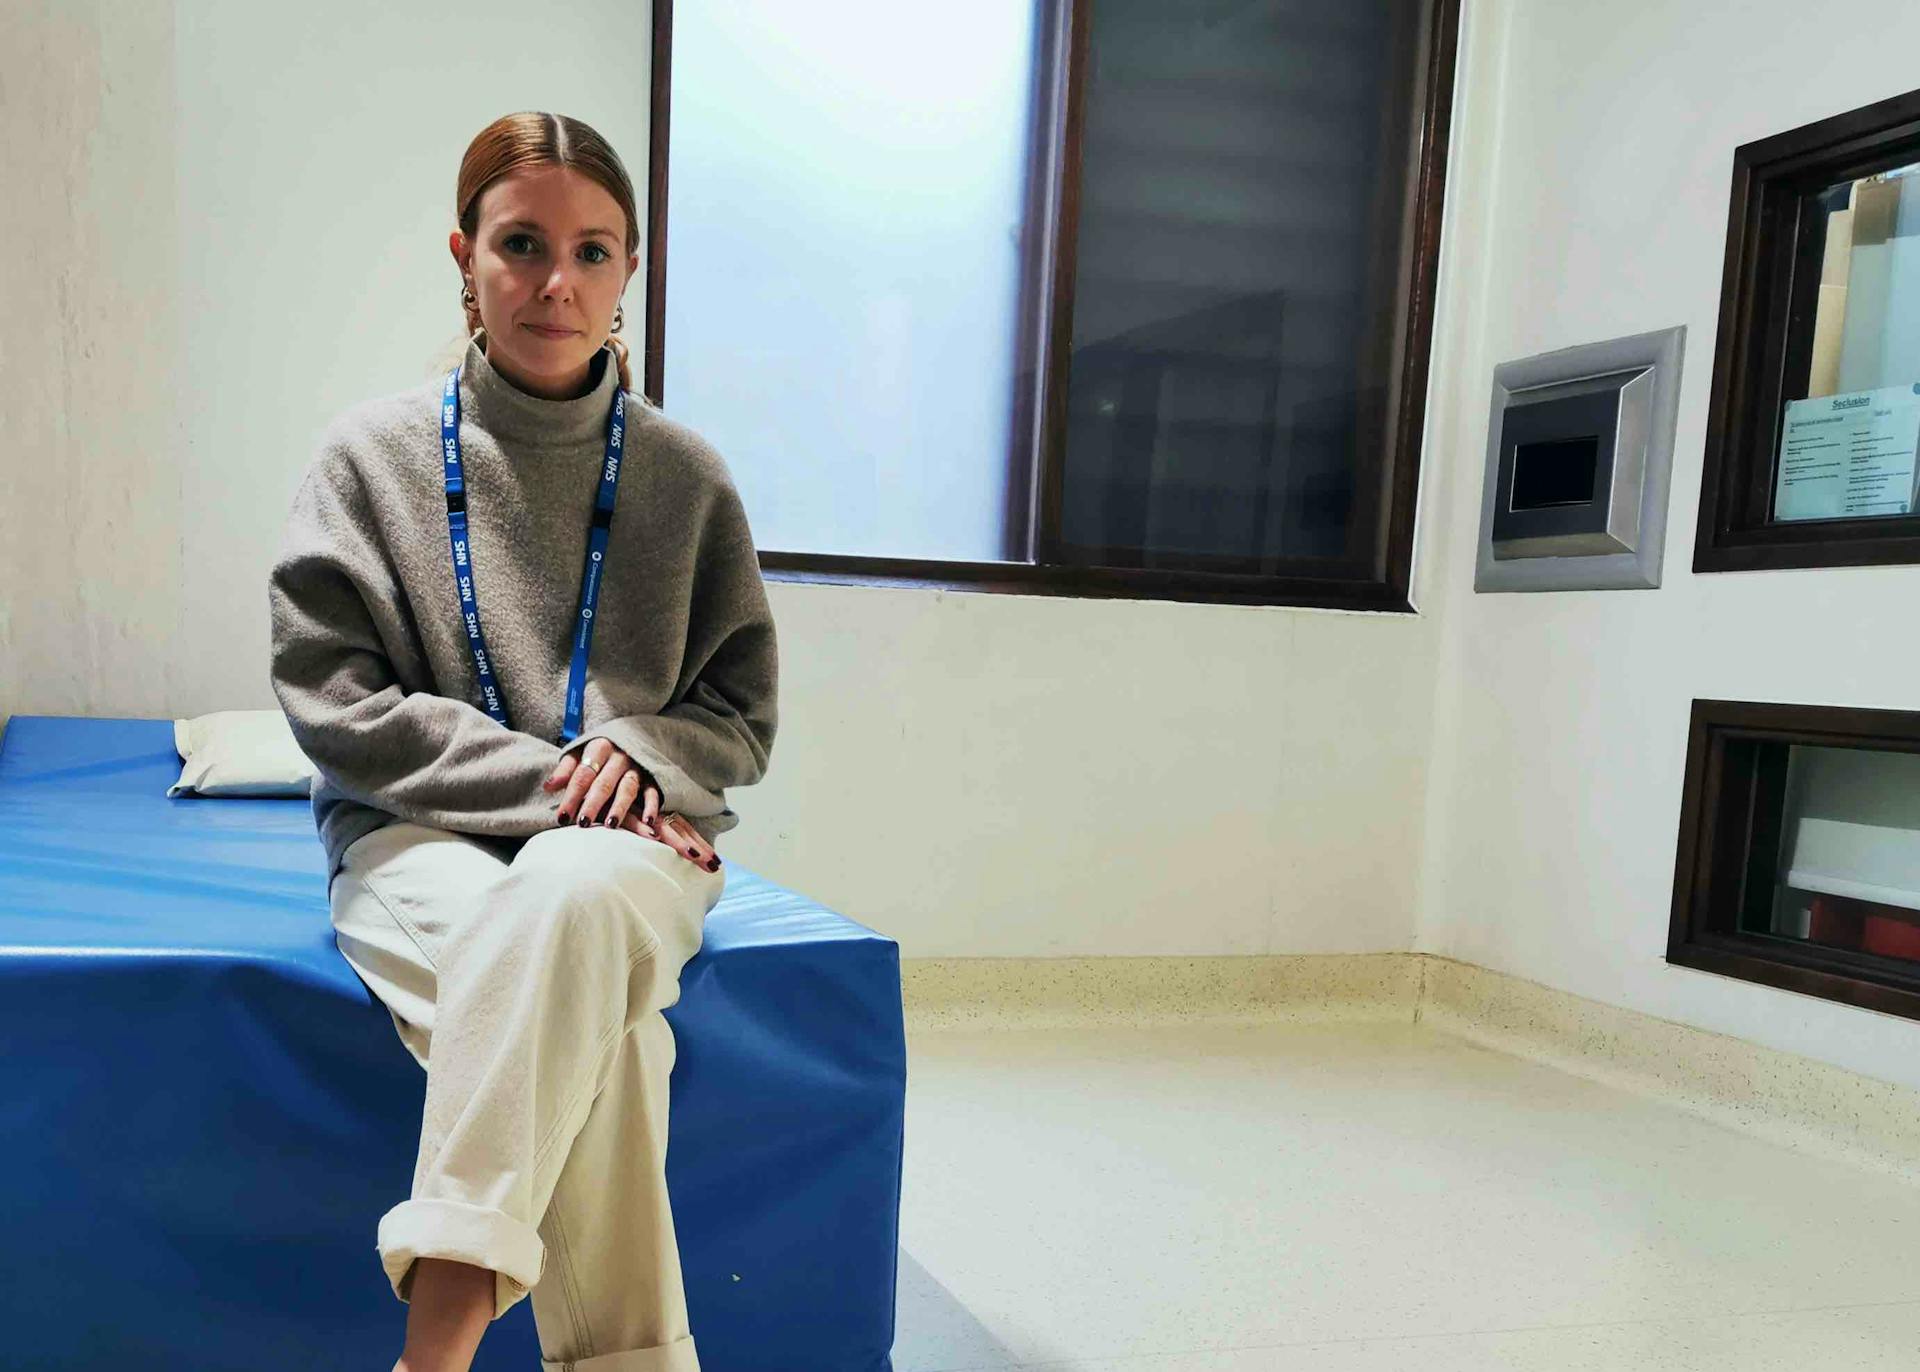 'Stacey Dooley: On The Psych Ward' - A snapshot of the UK’s mental health challenges